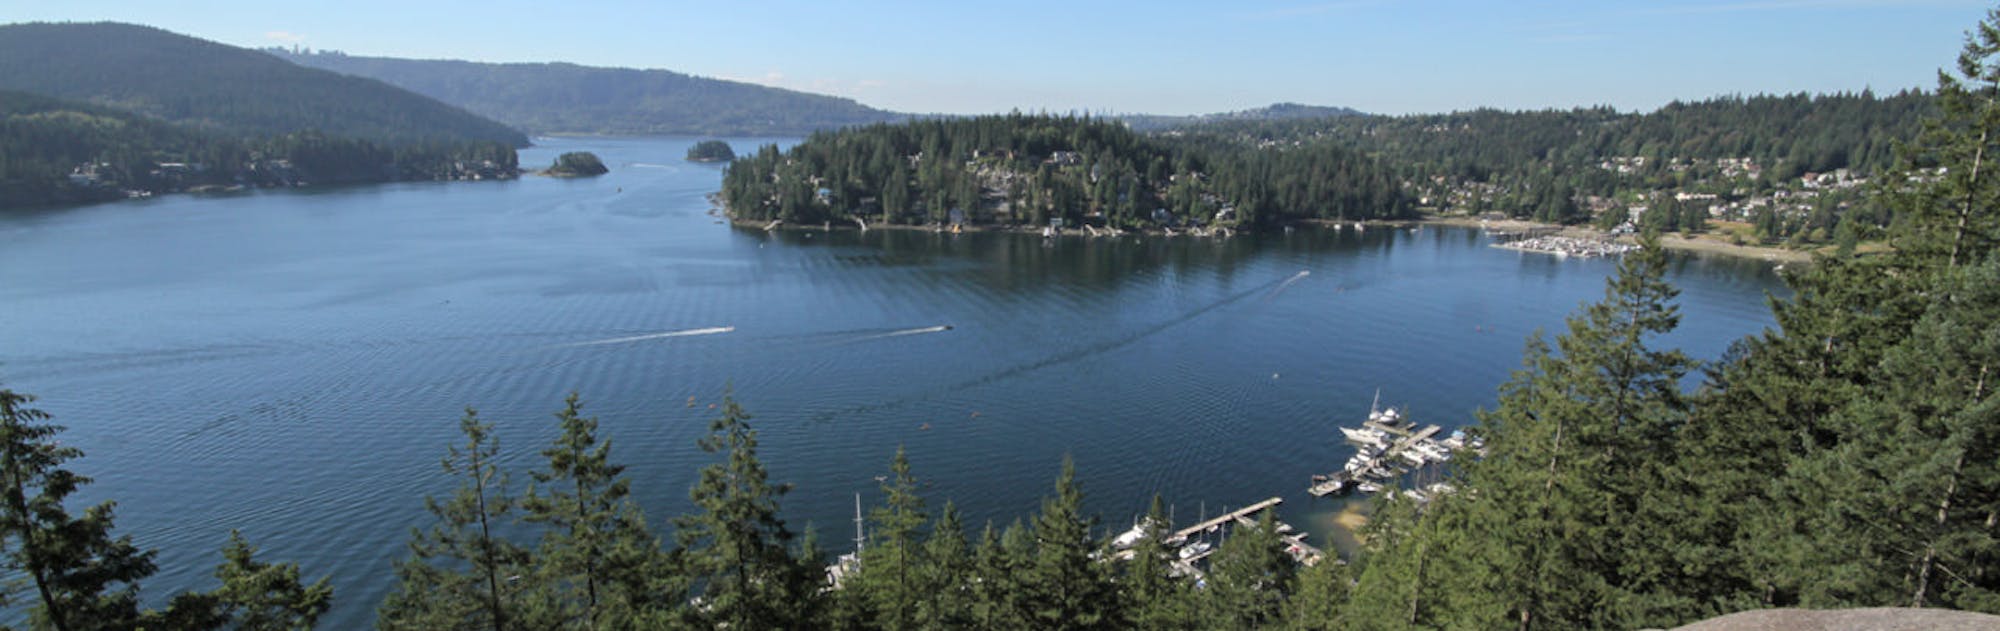 Deep Cove from atop Quarry Rock